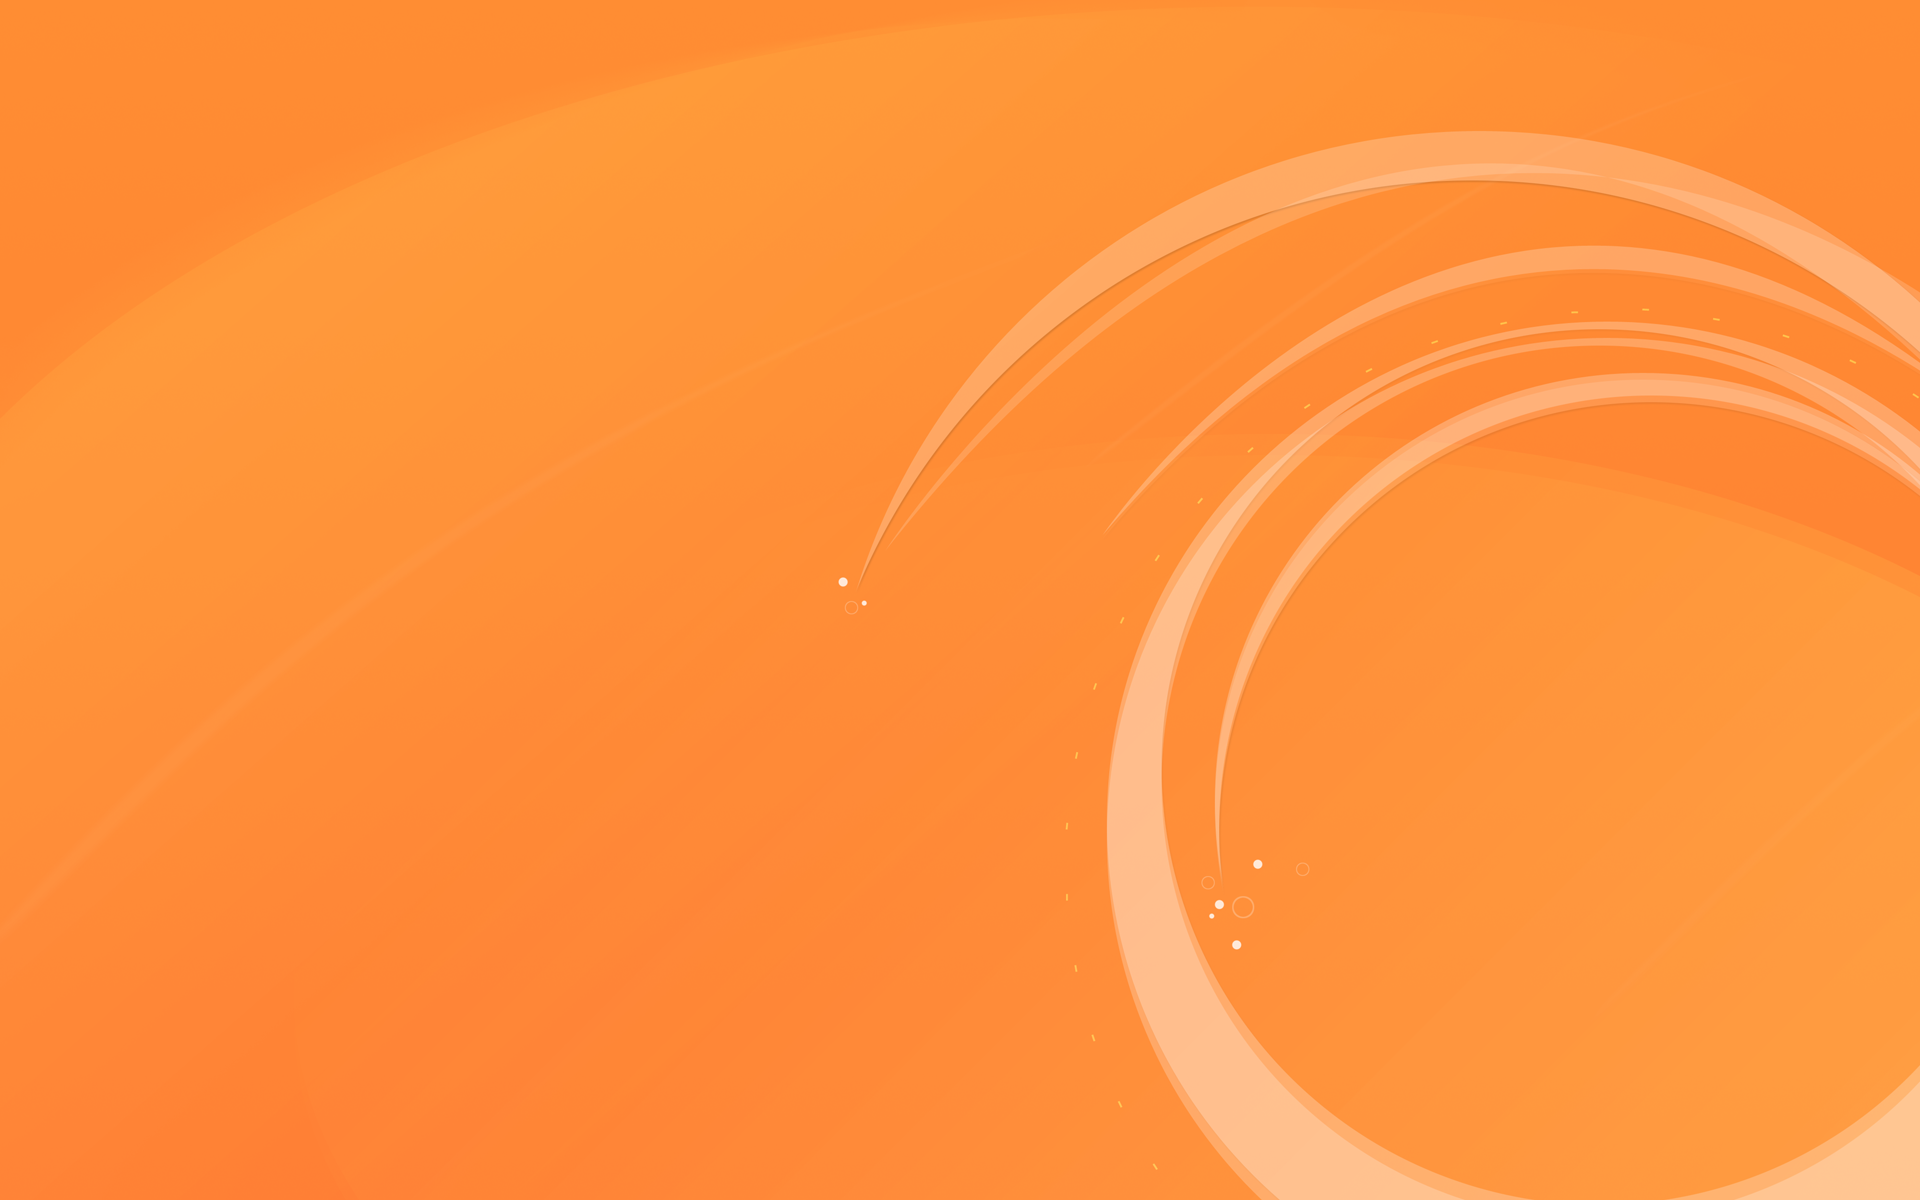 Free Download Orange Abstract Hd Wallpapers Orange Abstract High